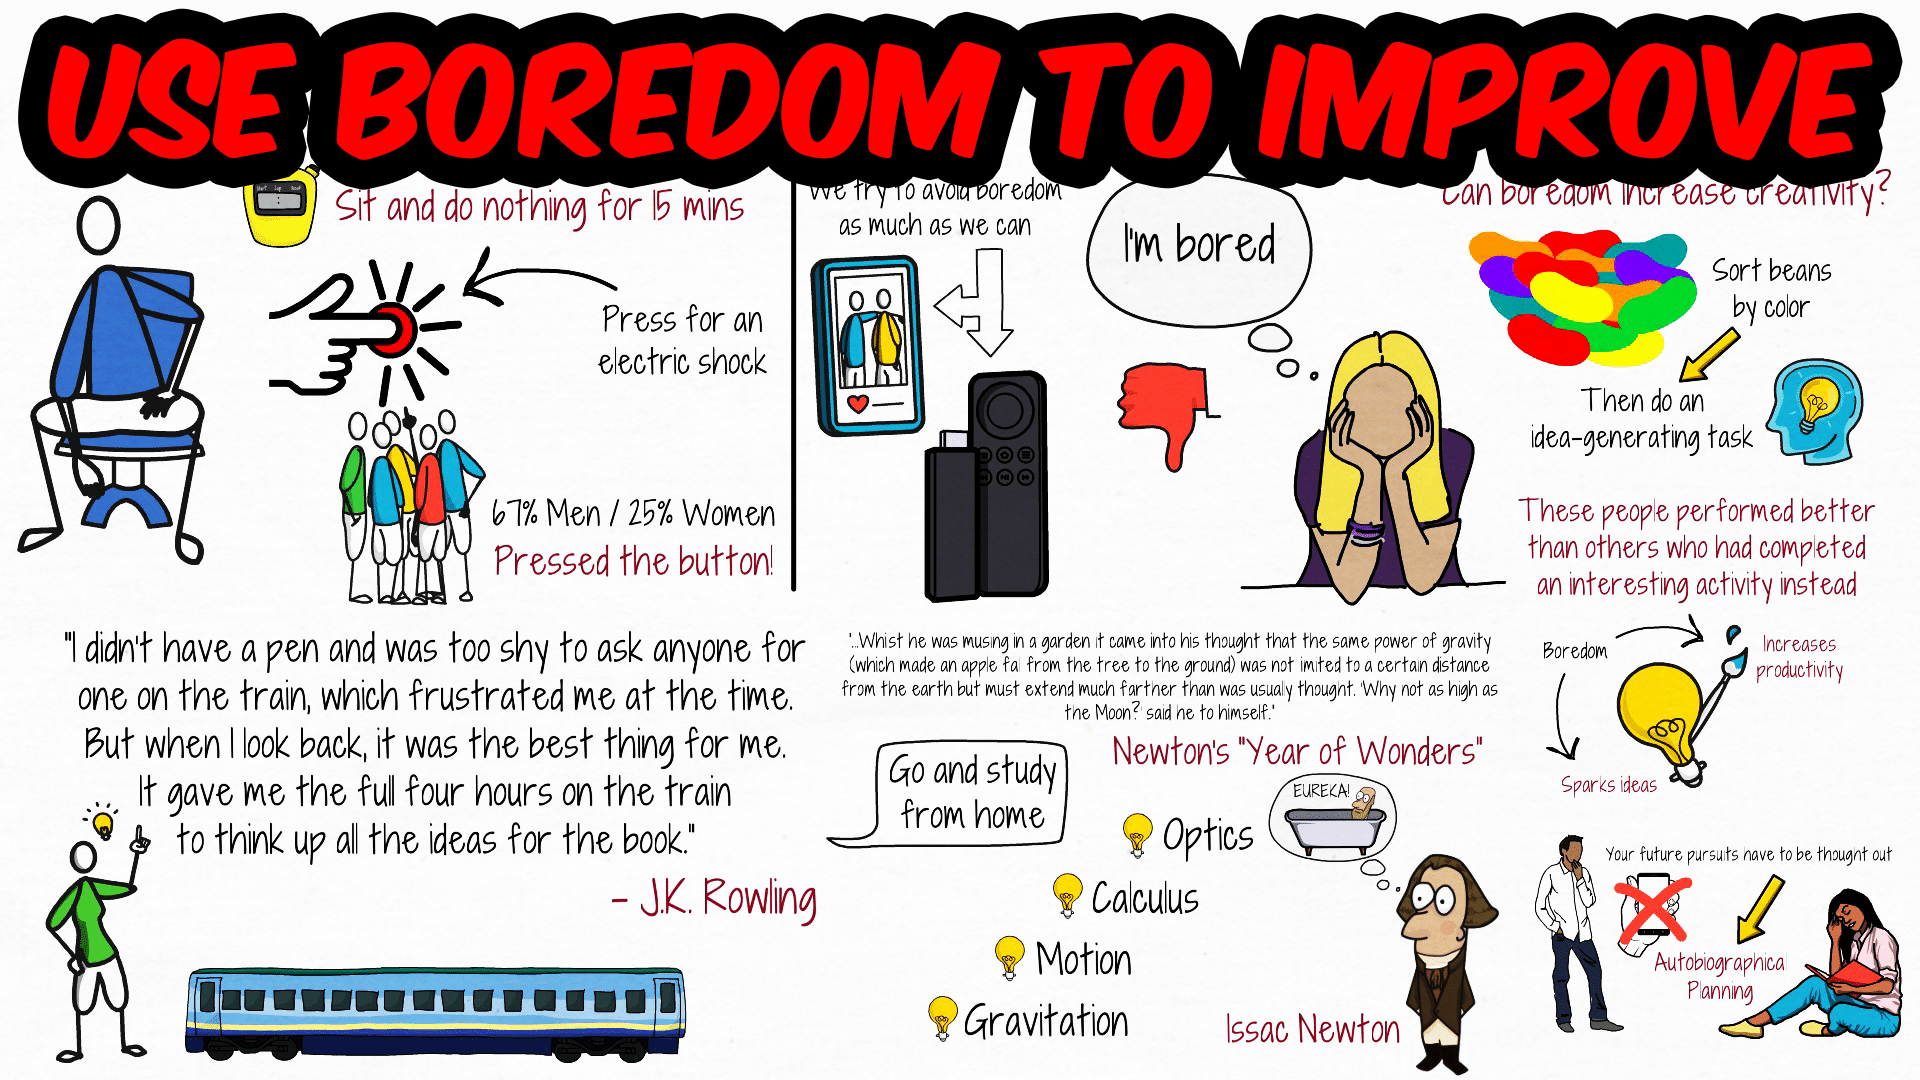 How Boredom Can Help You Be More Productive and Creative